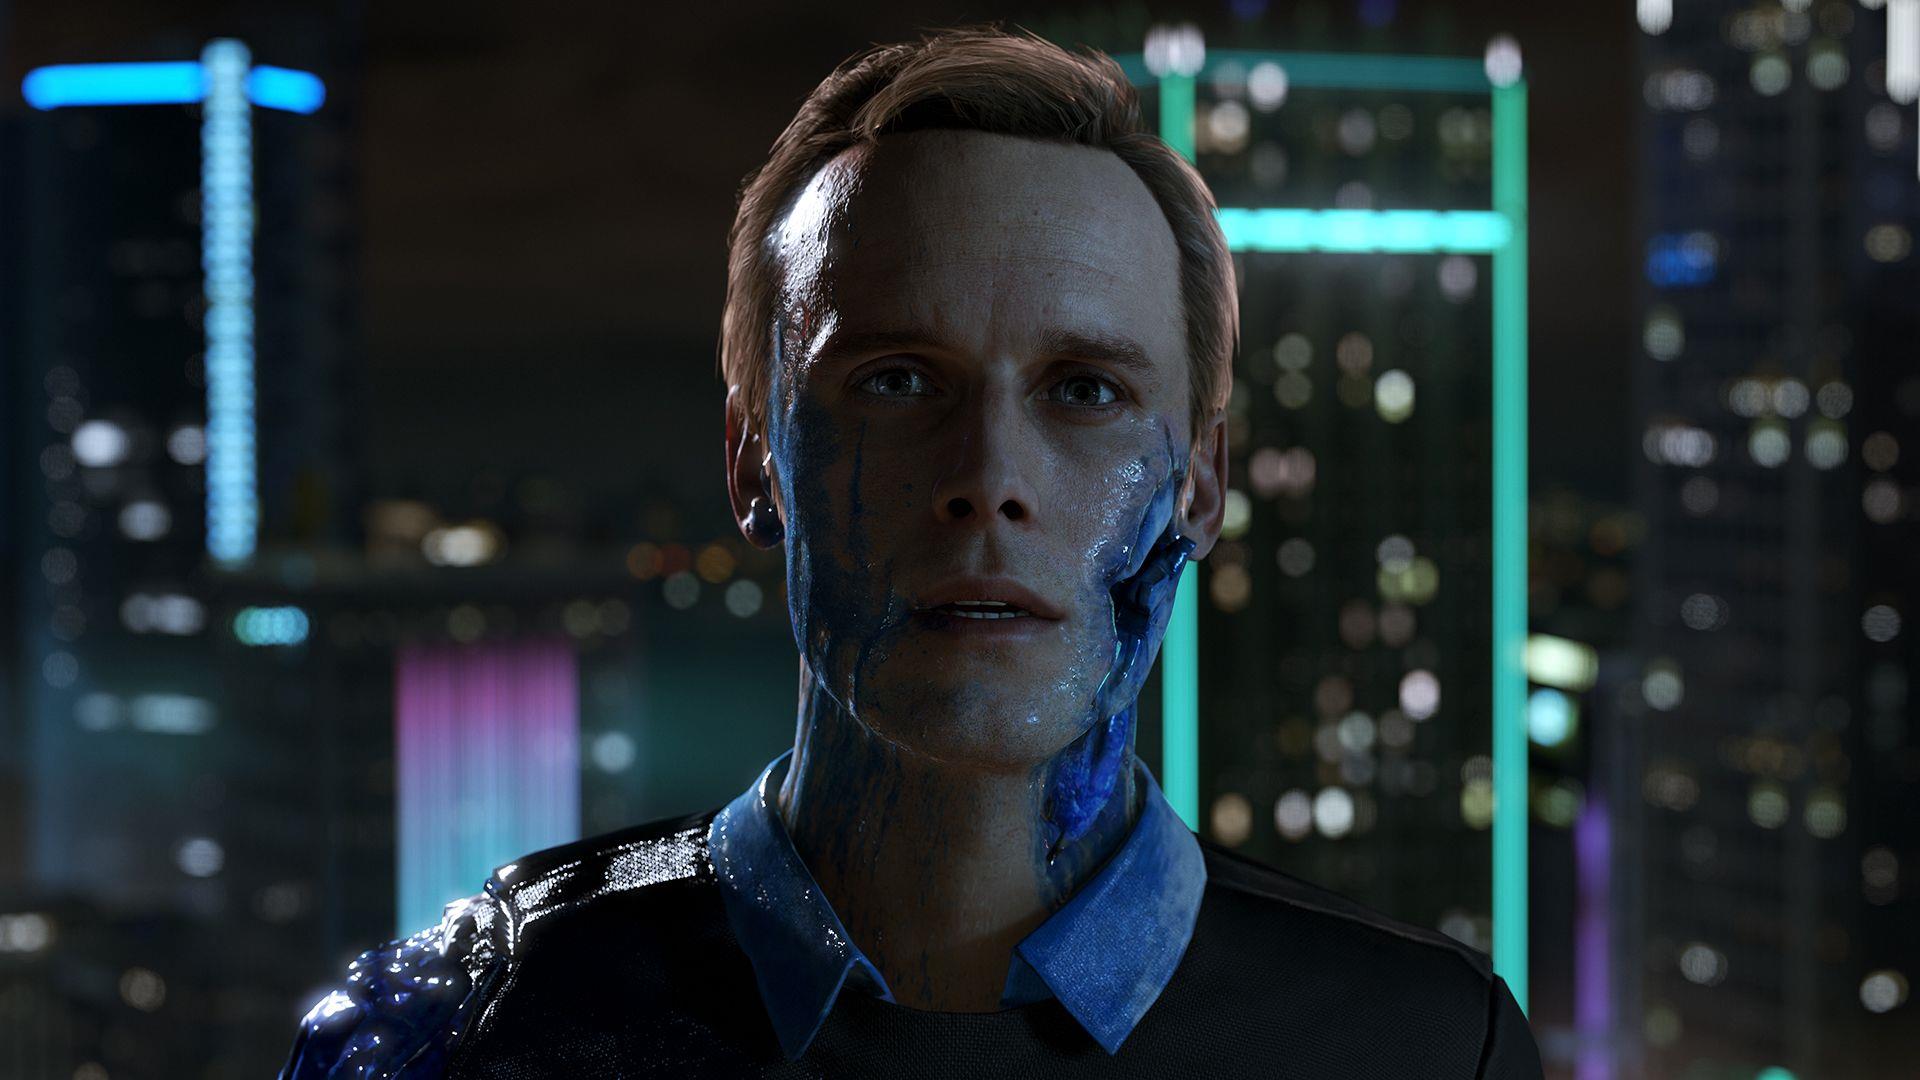 Image for Detroit: Become Human is 8 - 10 hours long, with a lot of replay value